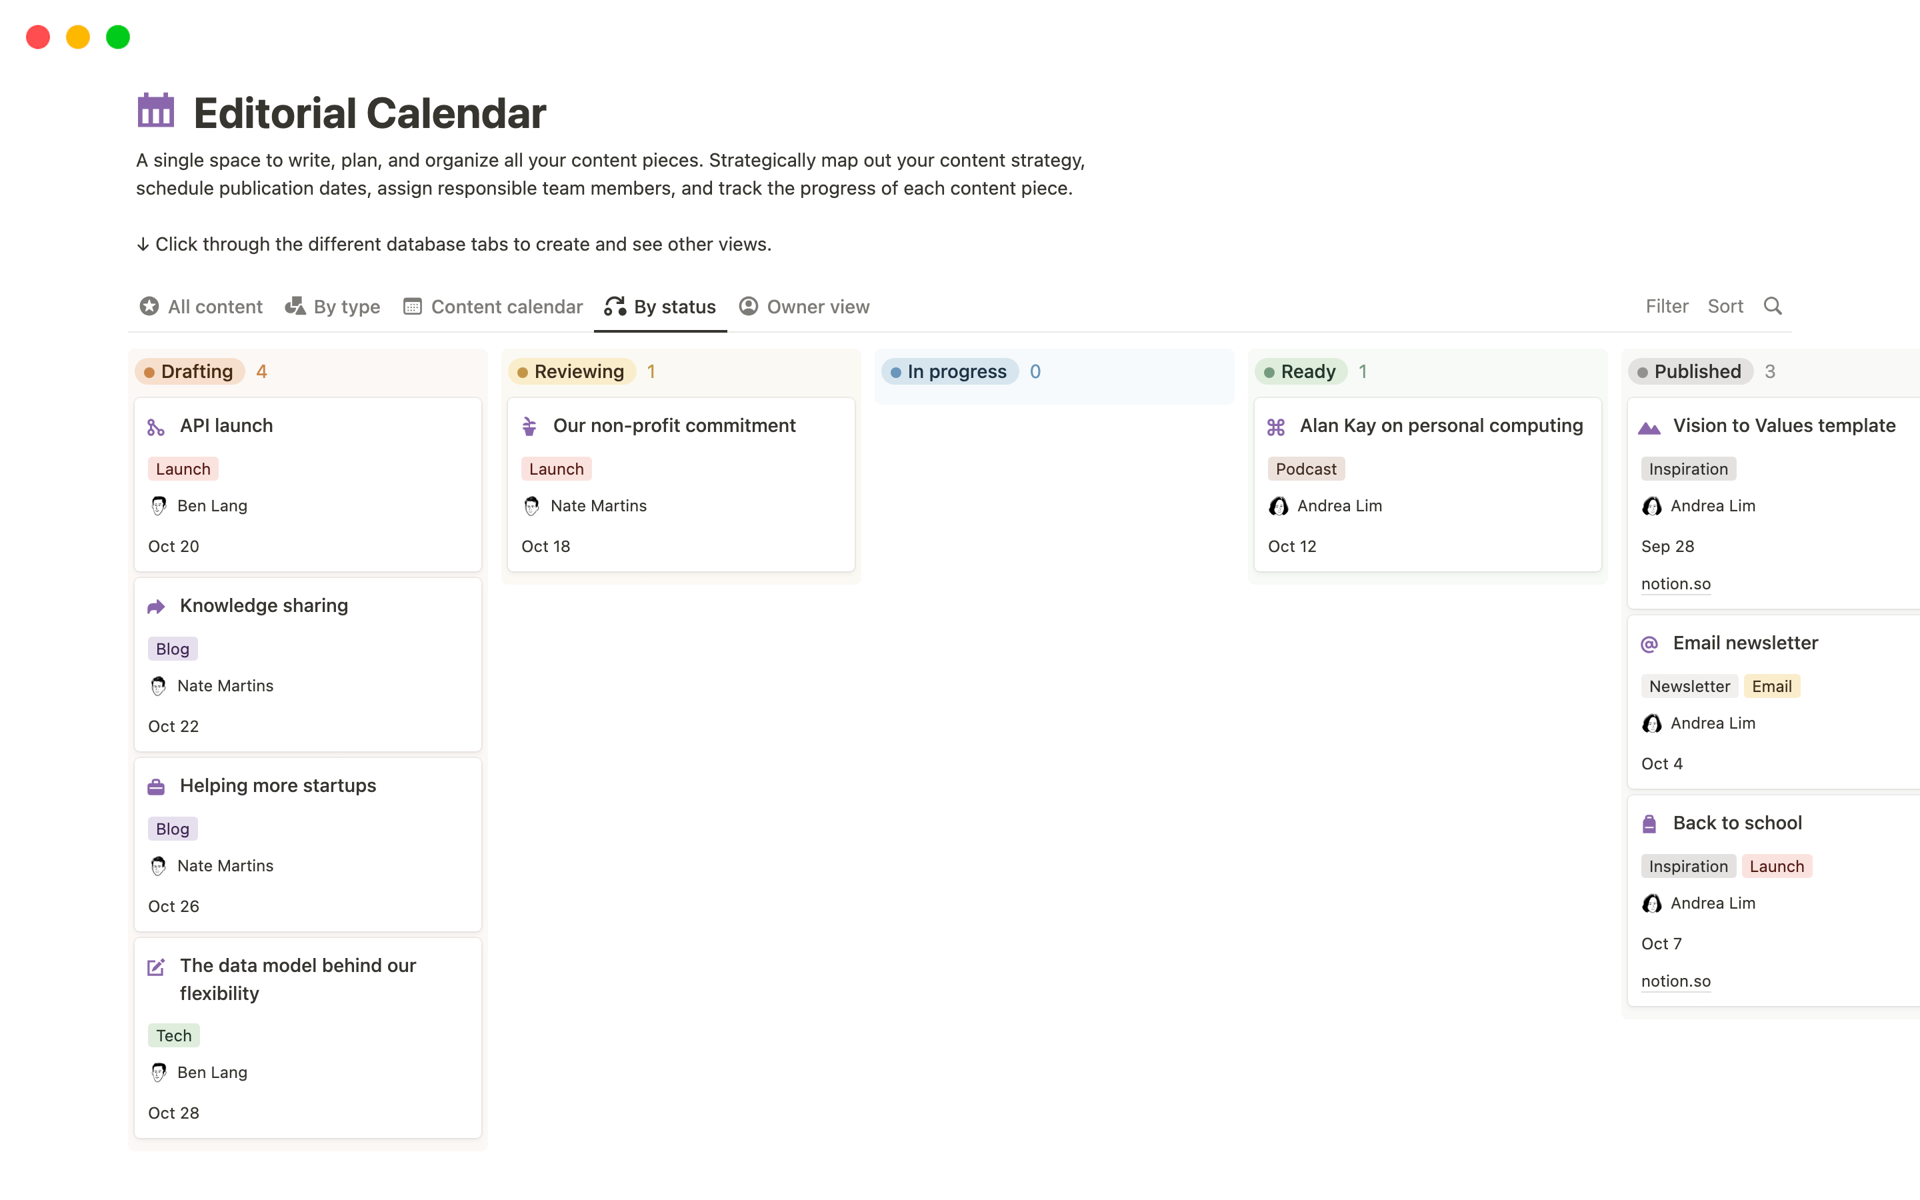 Streamline your content creation process with our versatile Editorial Calendar template.